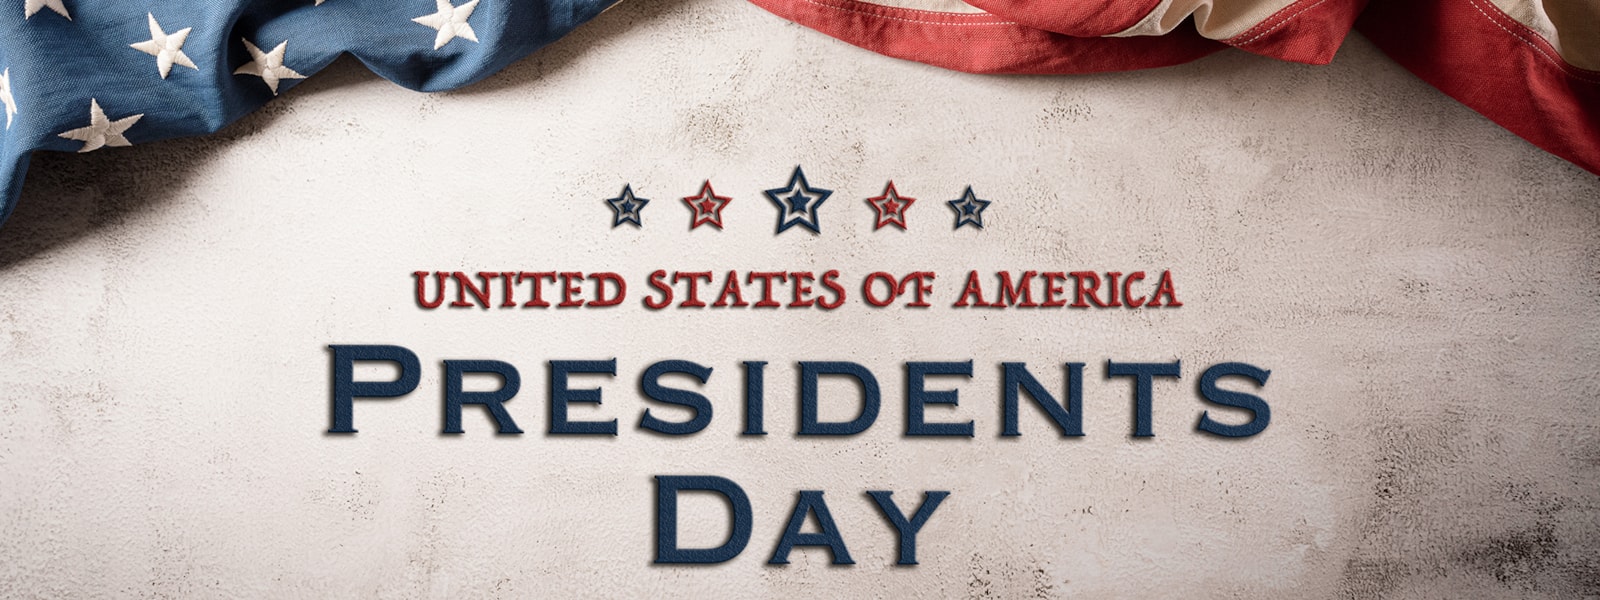 President Day Graphic 